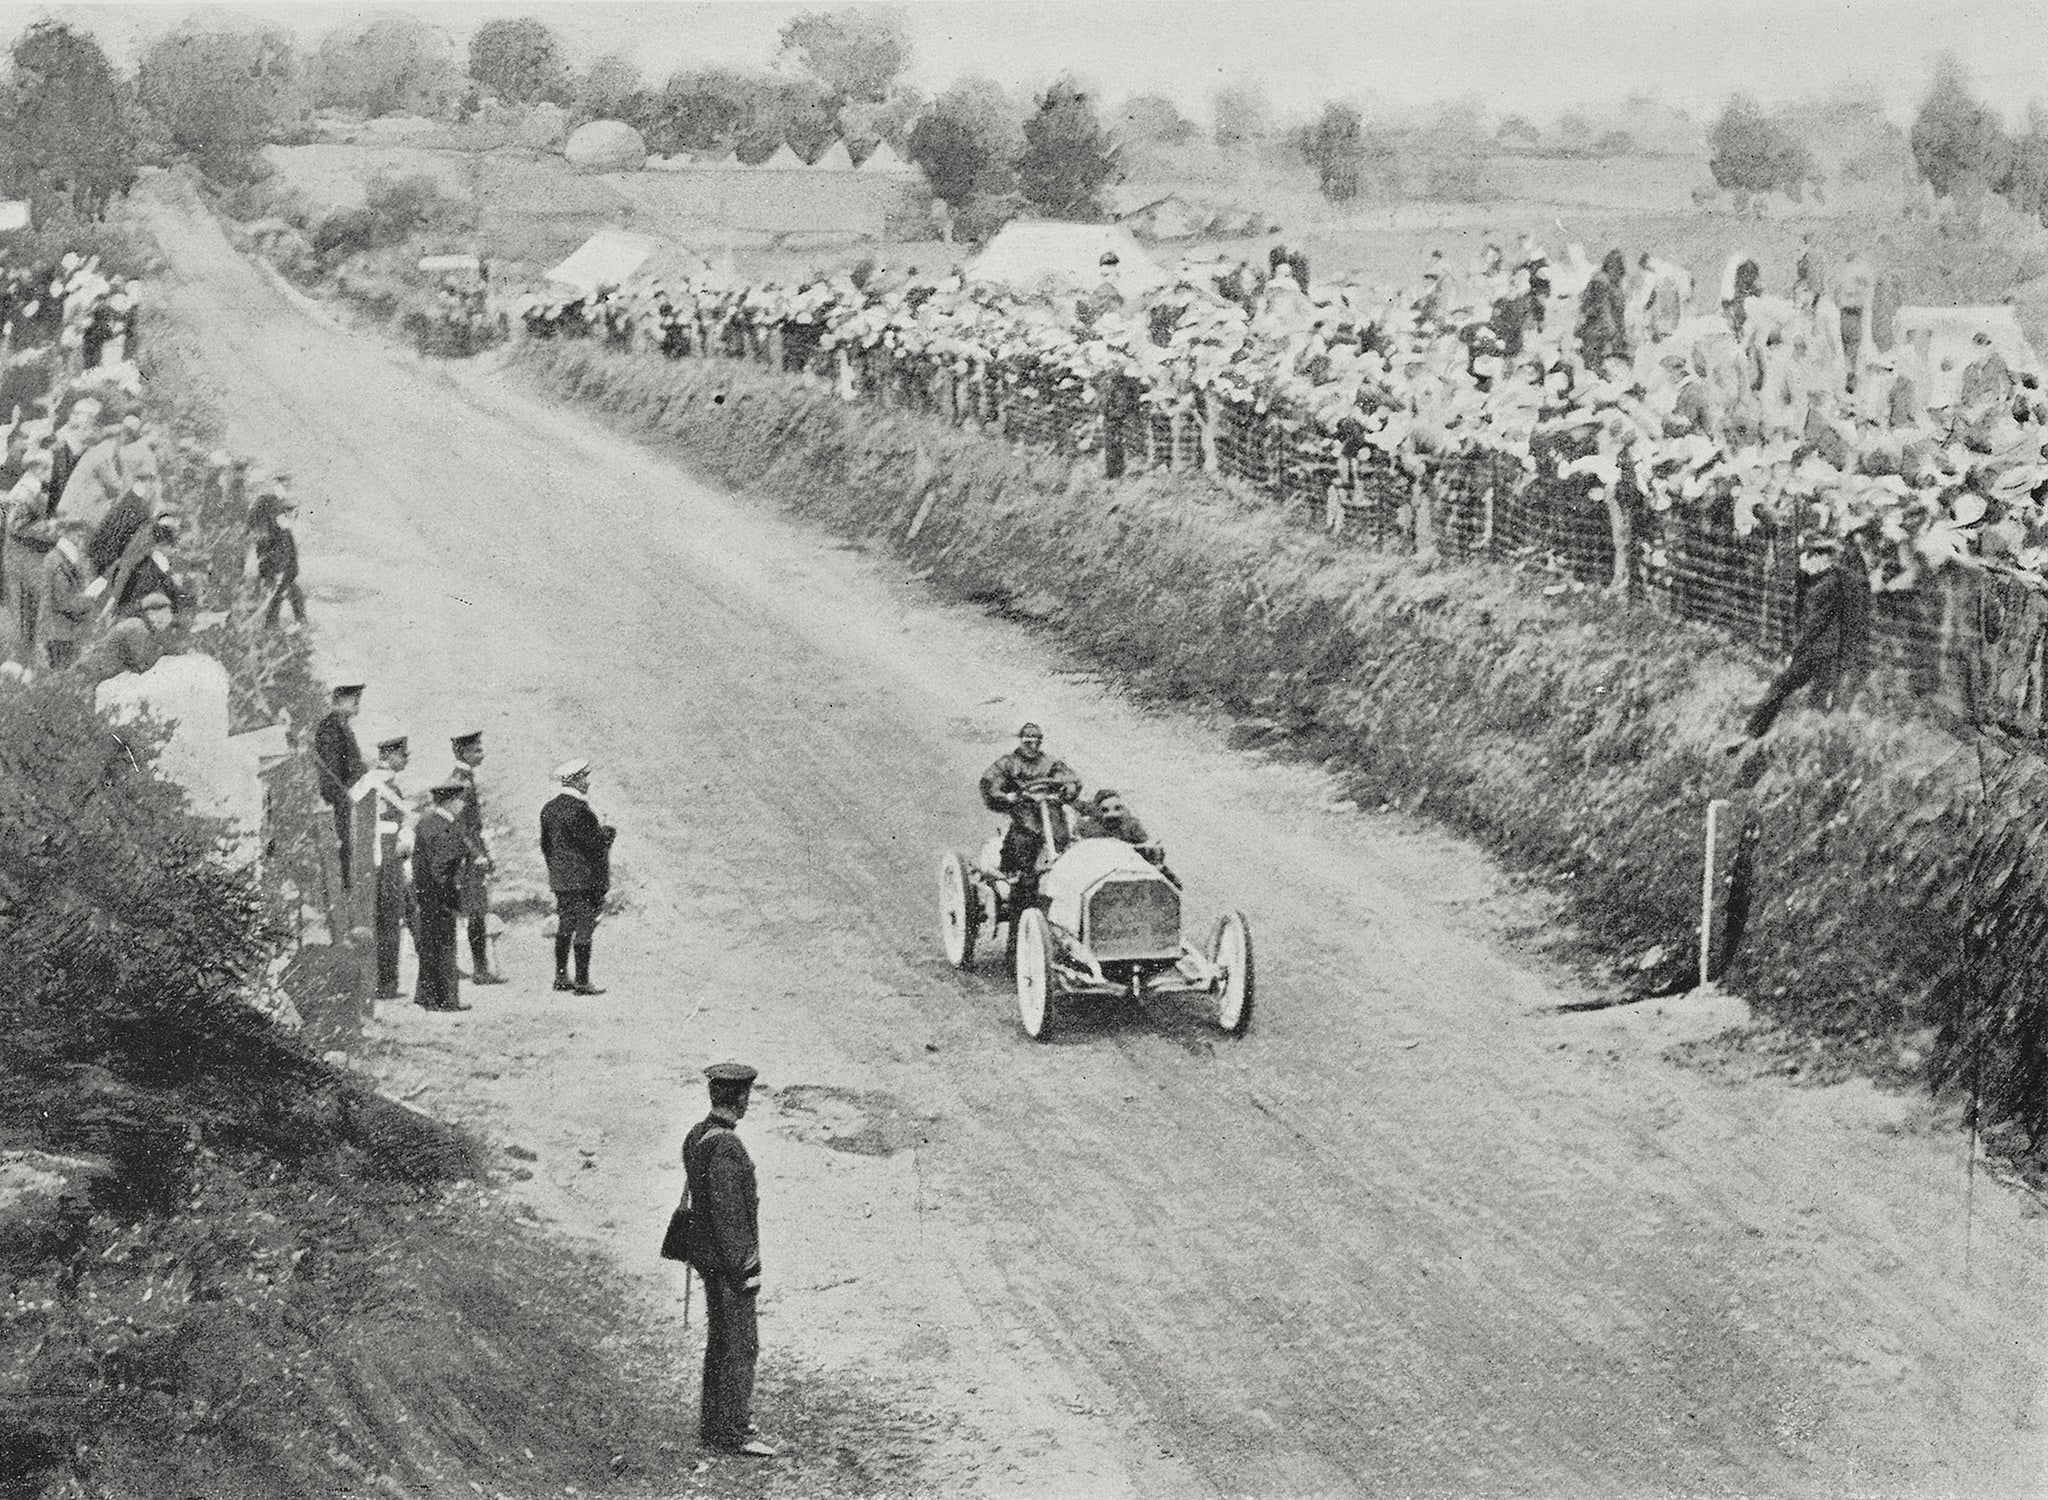 Camille Jenatzy driving a Mercedes, winner of the Gordon Bennett Cup, July 2, 1903, Ireland, photograph by Lafayette, from L'Illustrazione Italiana, Year XXX, No 28, July 12, 1903.